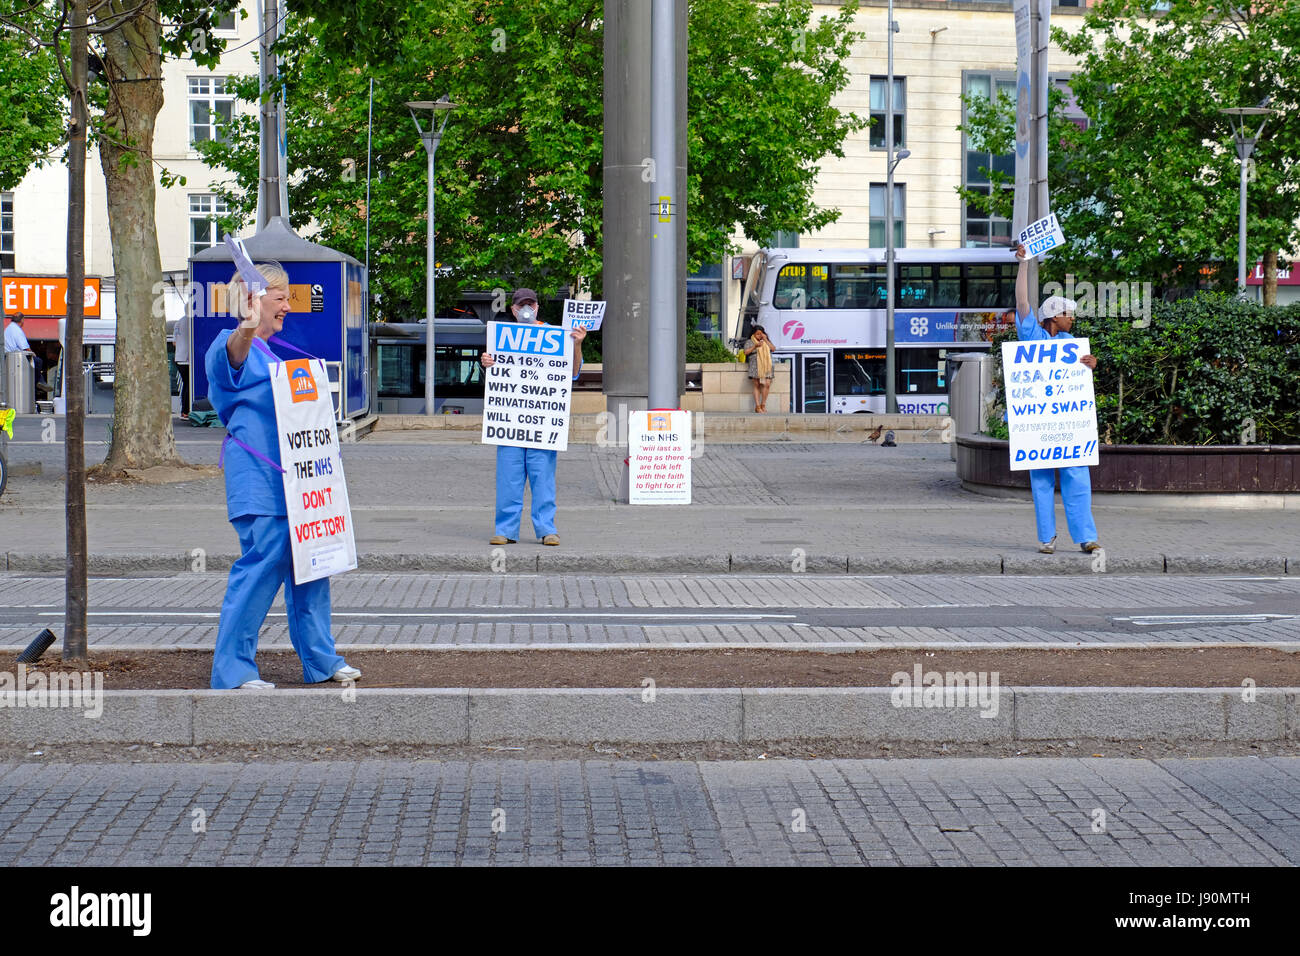 Bristol, UK. 30th May, 2017. Campaigners for the National Health Service take to the streets in the city centre. The campaigners from Protect Our NHS were distributing leaflets and urging passers-by not to vote for the Conservative Party in the general election. Keith Ramsey/Alamy Live News Stock Photo